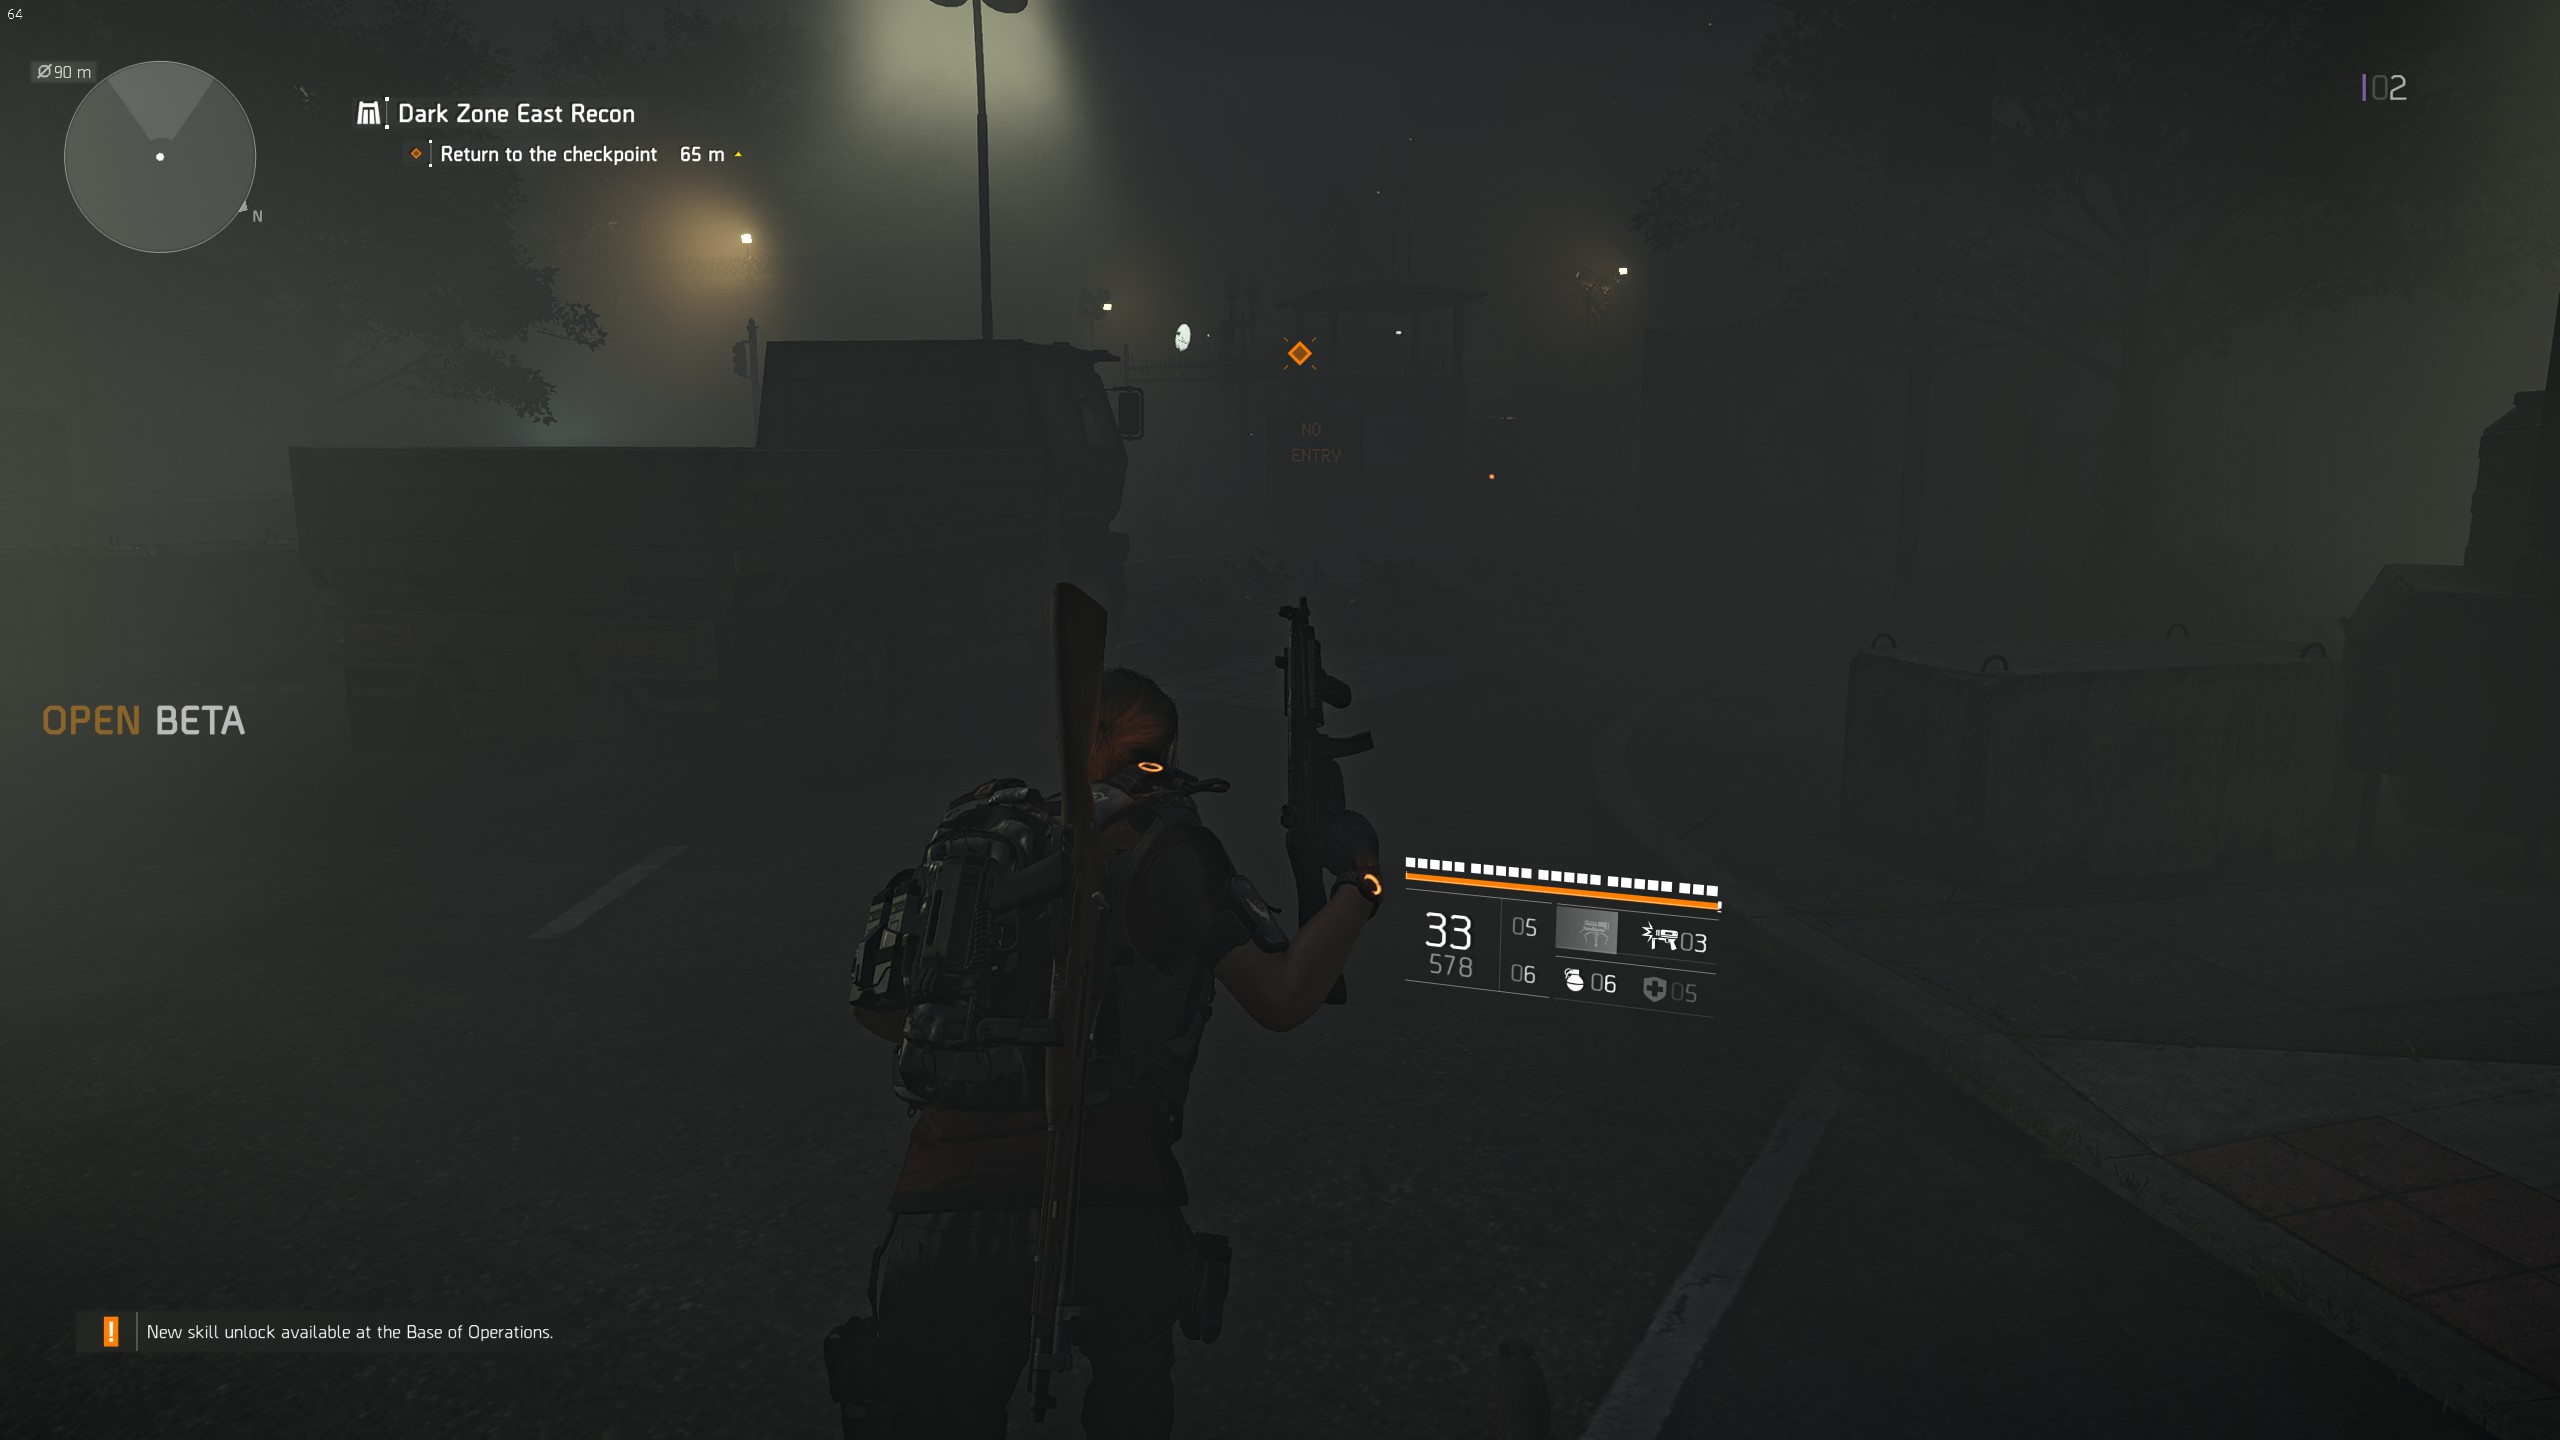 Tom Clancy’s The Division 2 - Open Beta2019-3-2-14-16-26.jpg